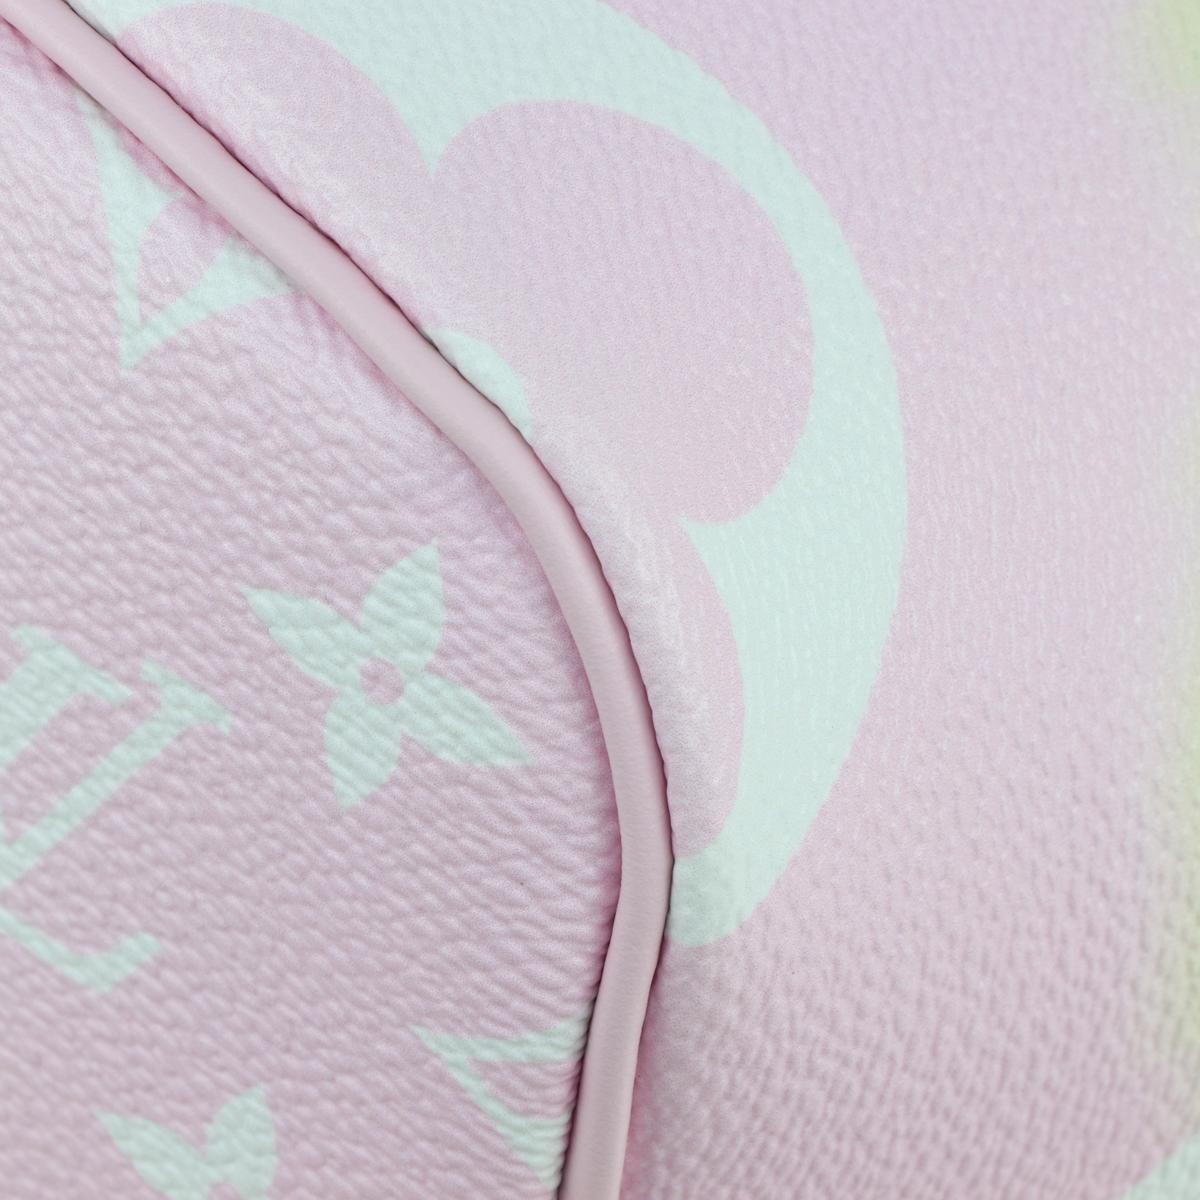 Louis Vuitton Escale Neverfull MM Bag in Pastel 2020 Limited Edition For Sale 2